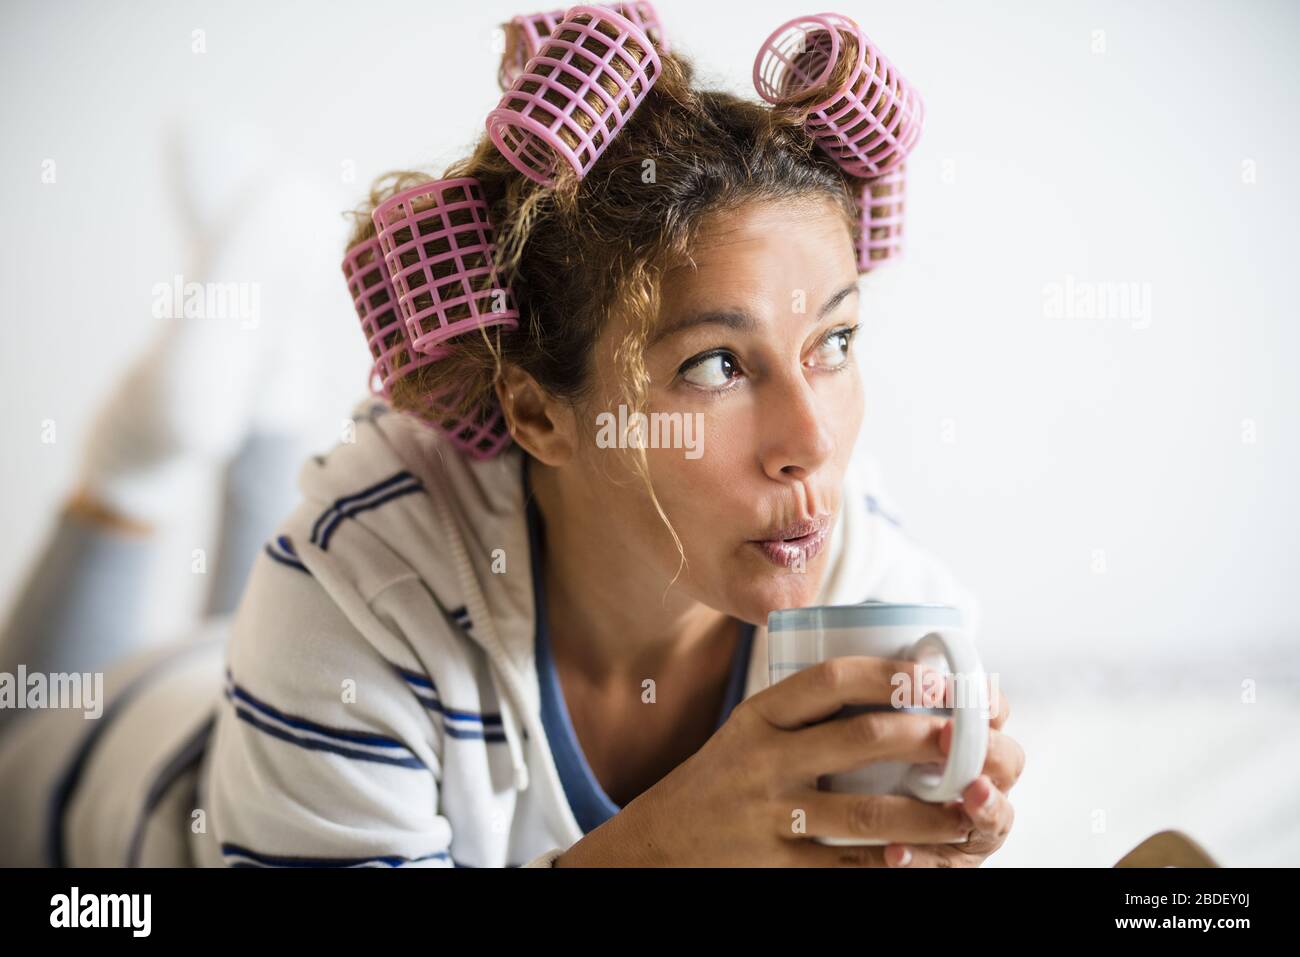 Woman with hair curlers holding mug Stock Photo